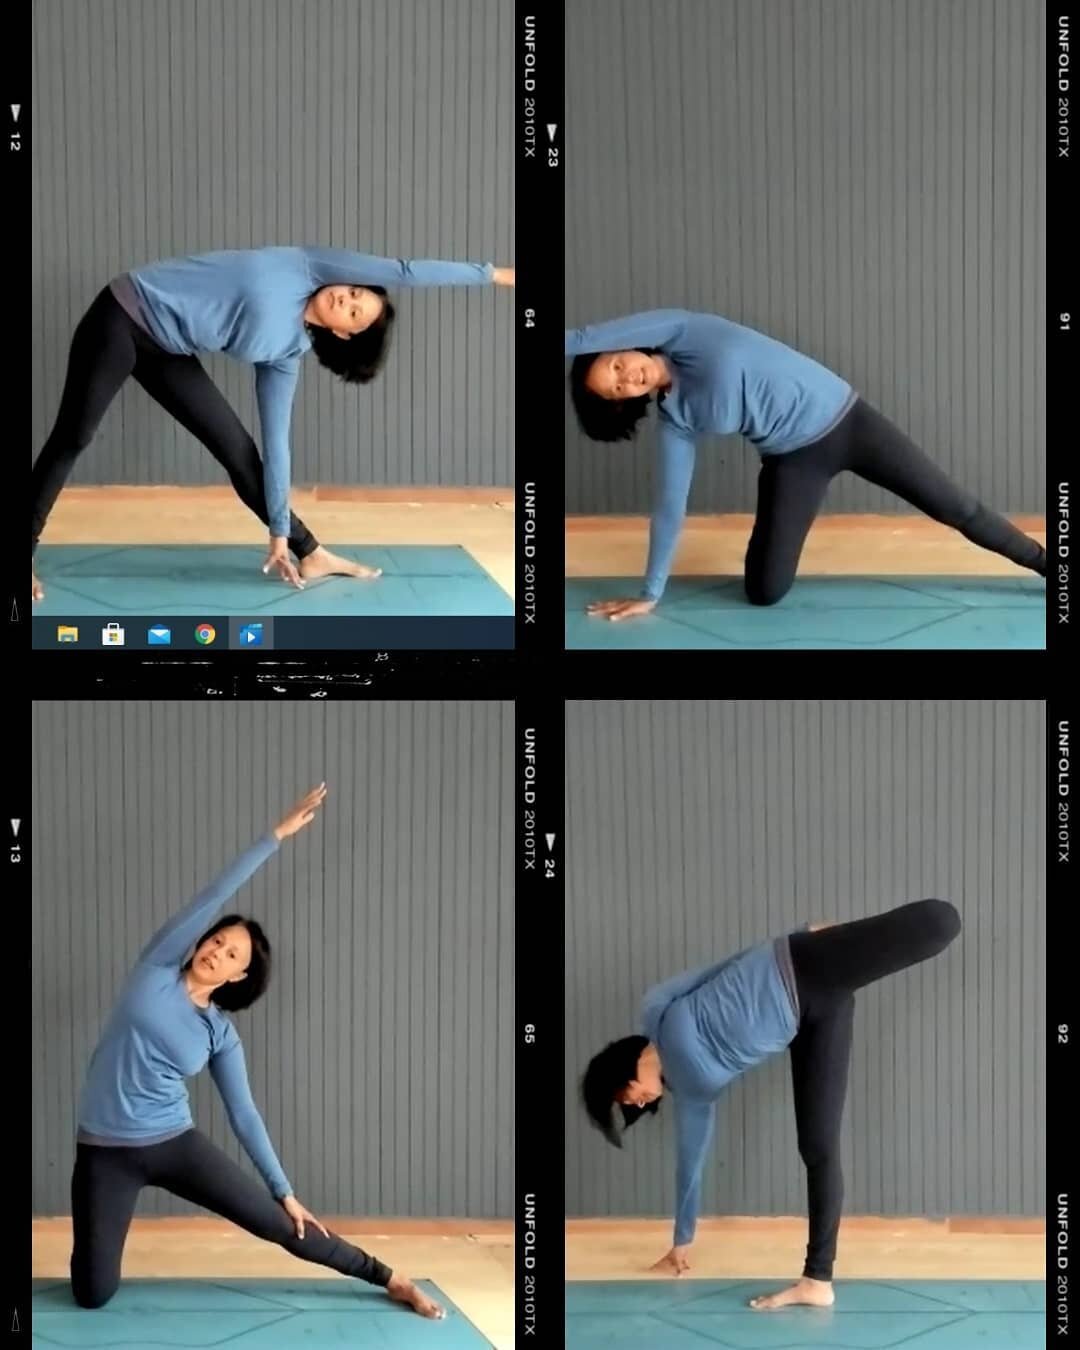 Yoga with plenty of feel good  somatic movements online this week.

Come and try. Your body will love it! 

All but one class is donation based. 
www.shantishimmy-yoga.com 

.

.

.

.
#logitech #logitechbrio
#onlineyoga #beginnersyoga#yogapose #begi